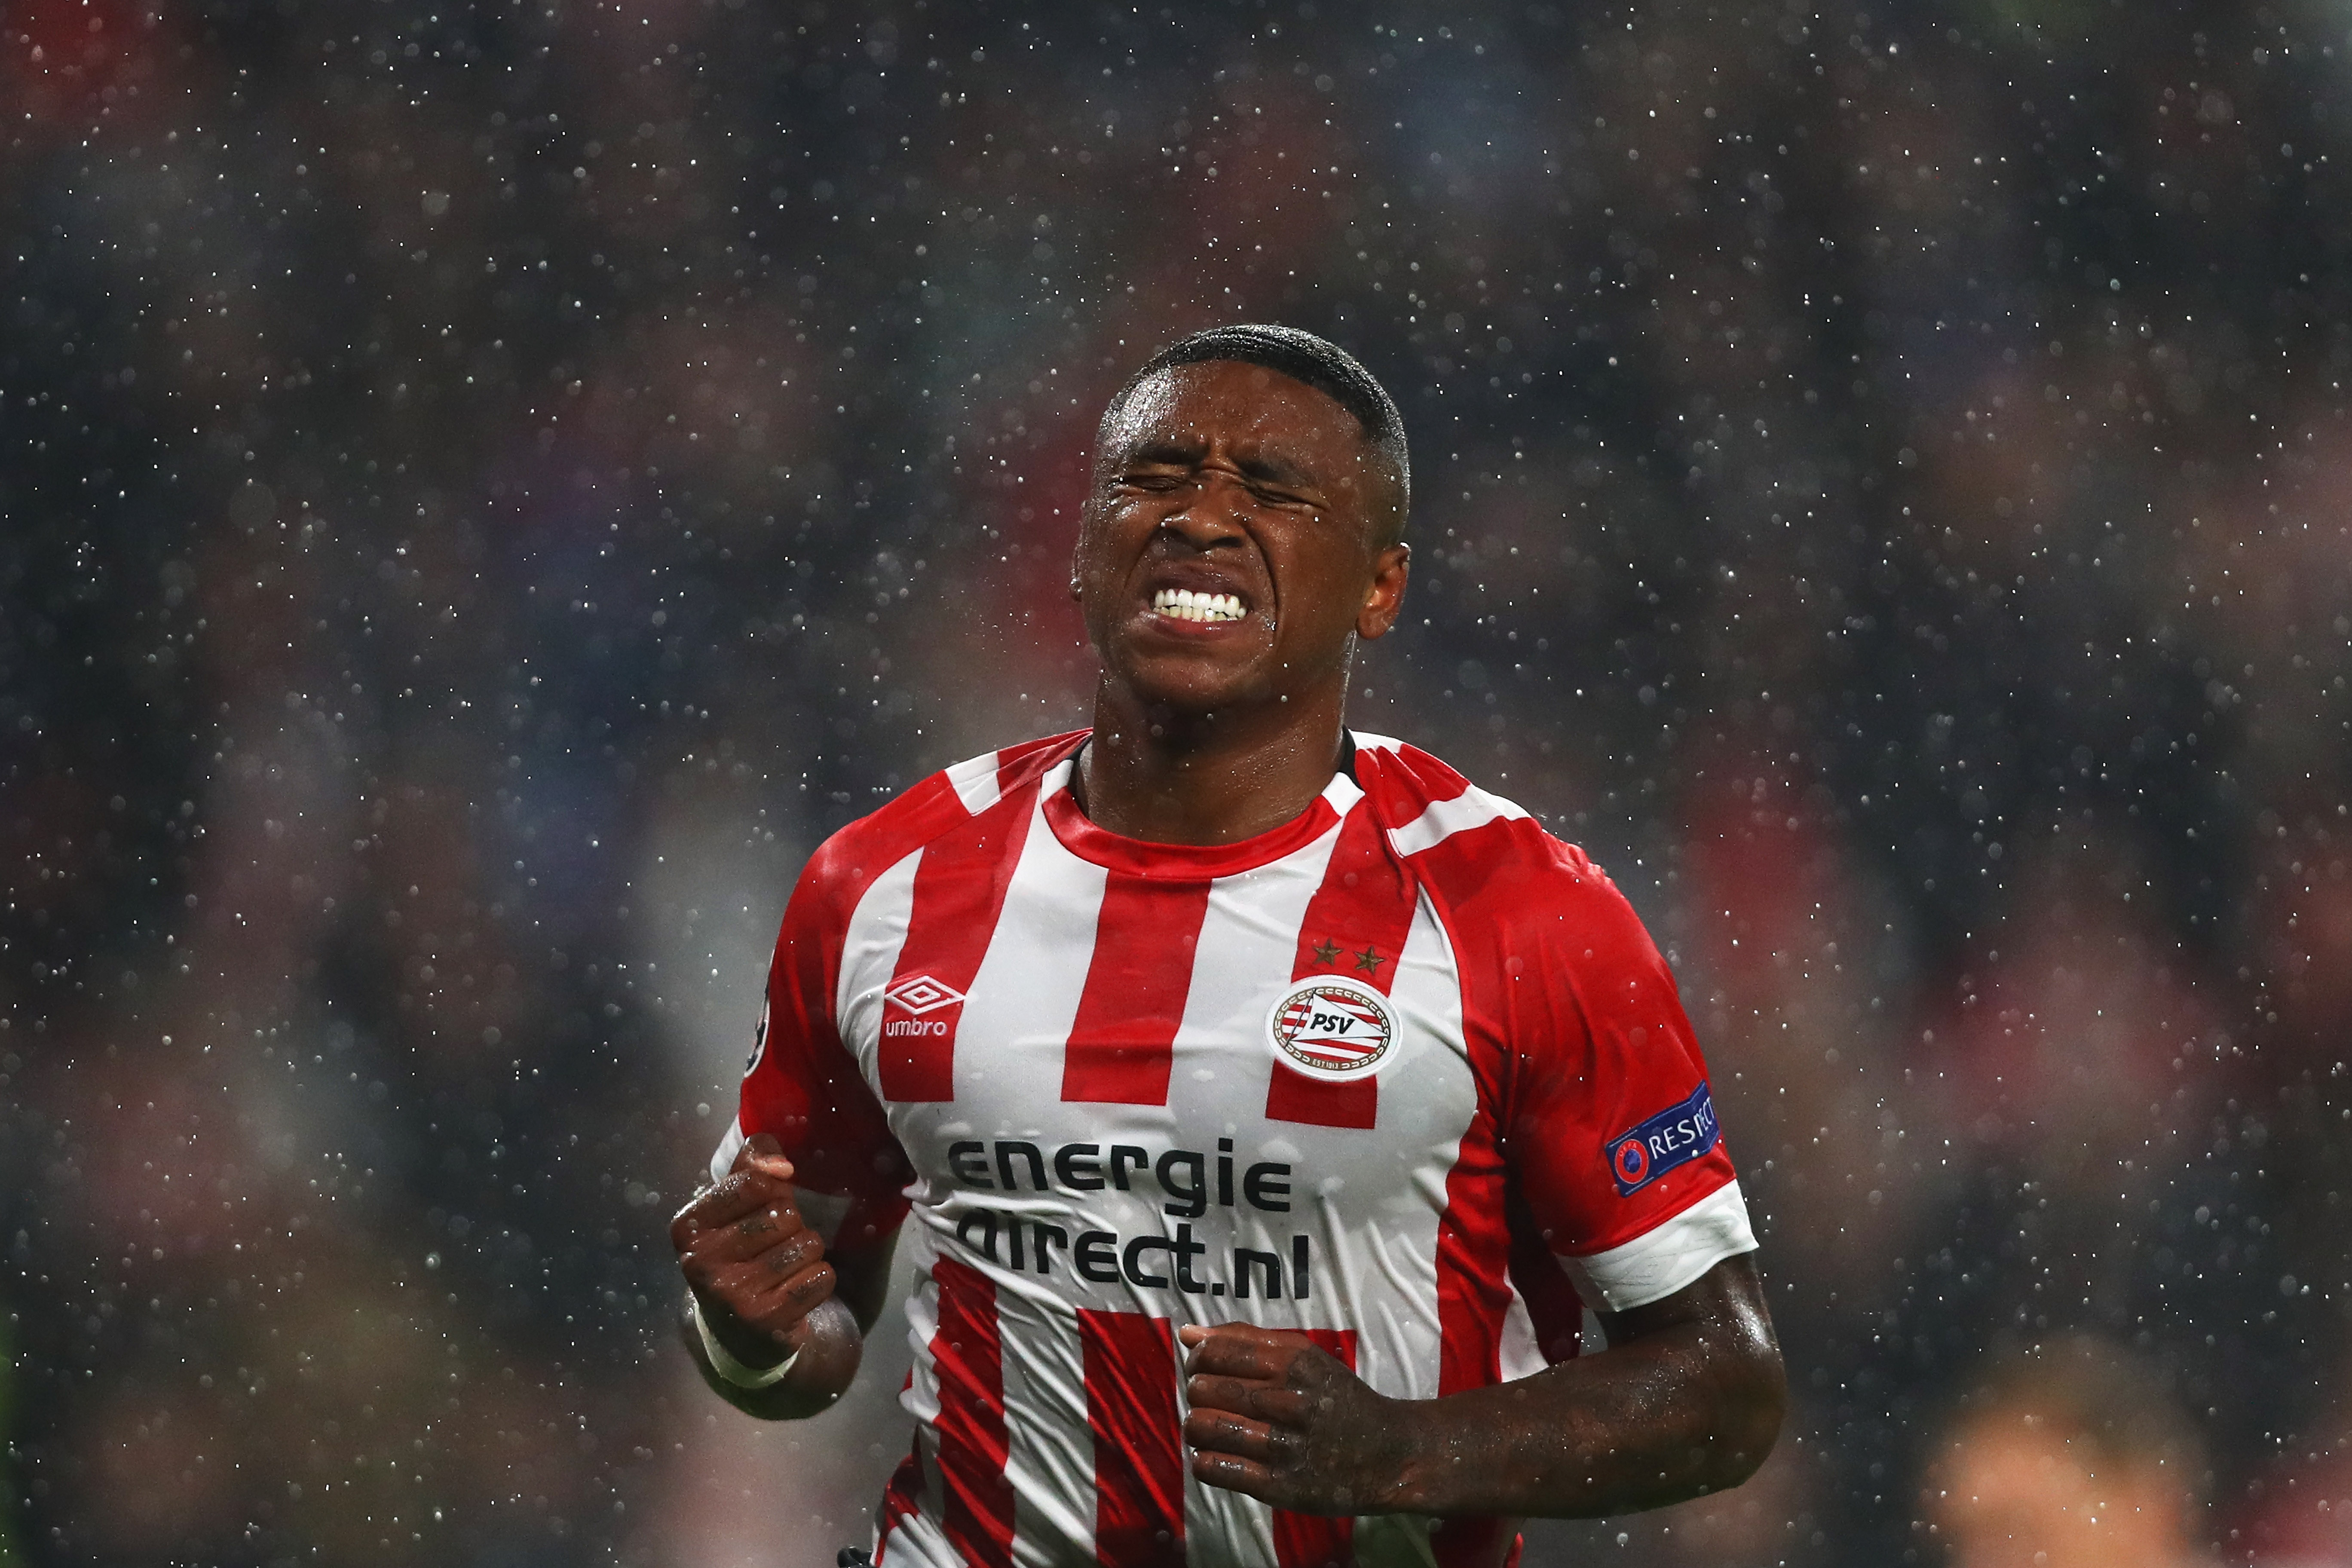 EINDHOVEN, NETHERLANDS - AUGUST 29:  Steven Bergwijn of PSV celebrates scoring his teams first goal of the game during the UEFA Champions League Play-offs , 2nd leg match between PSV and FC BATE Borisov at Phillips Stadium on August 29, 2018 in Eindhoven, Netherlands.  (Photo by Dean Mouhtaropoulos/Getty Images)